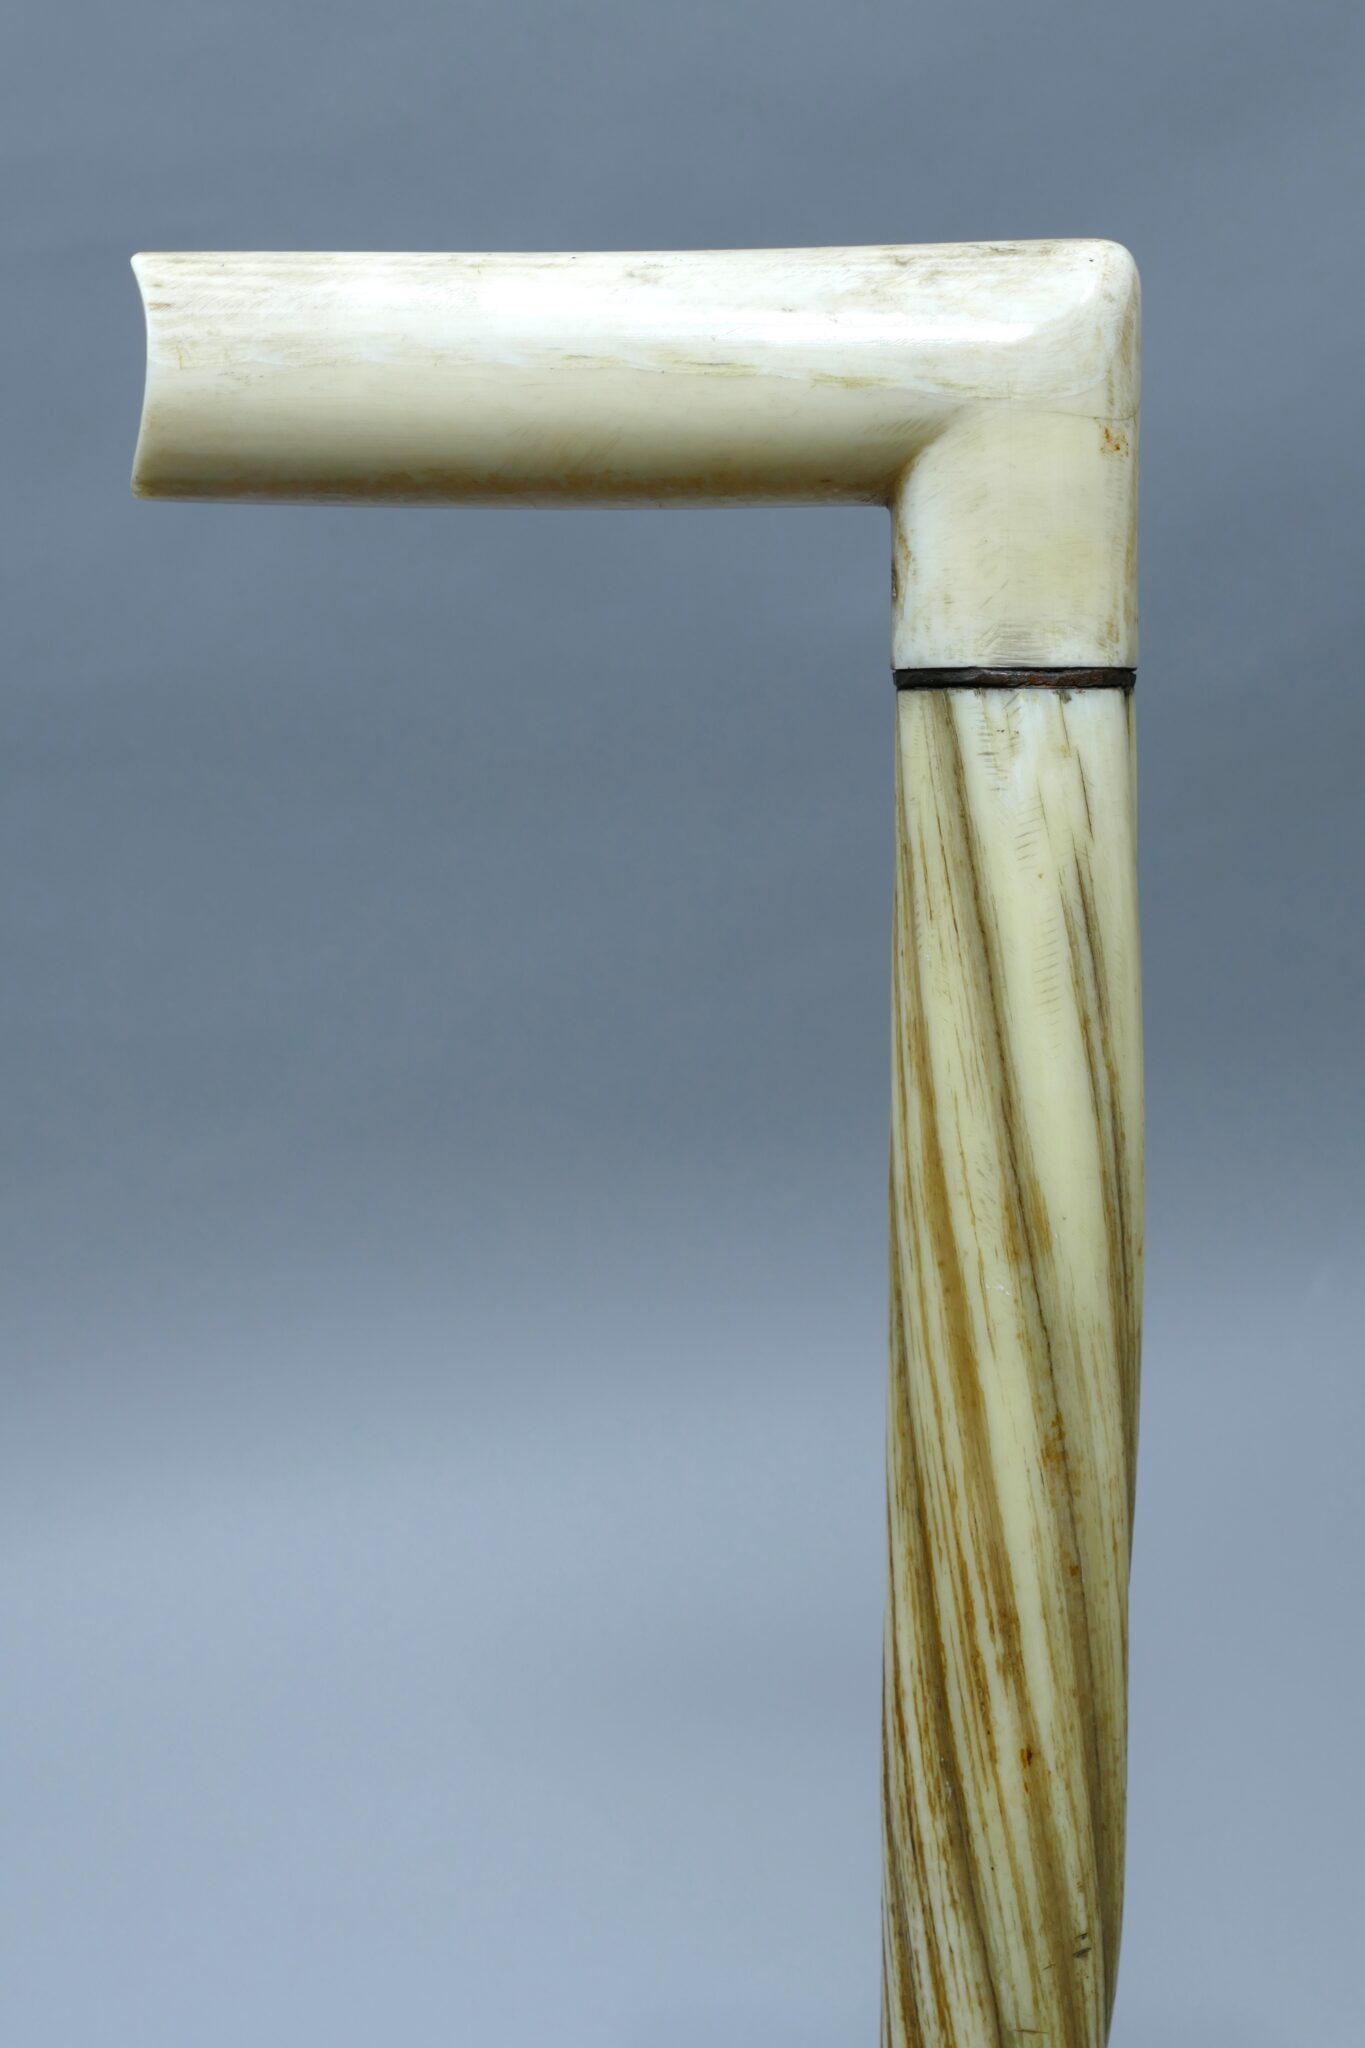 Narwhal cane made in Greenland first part of 19th century.